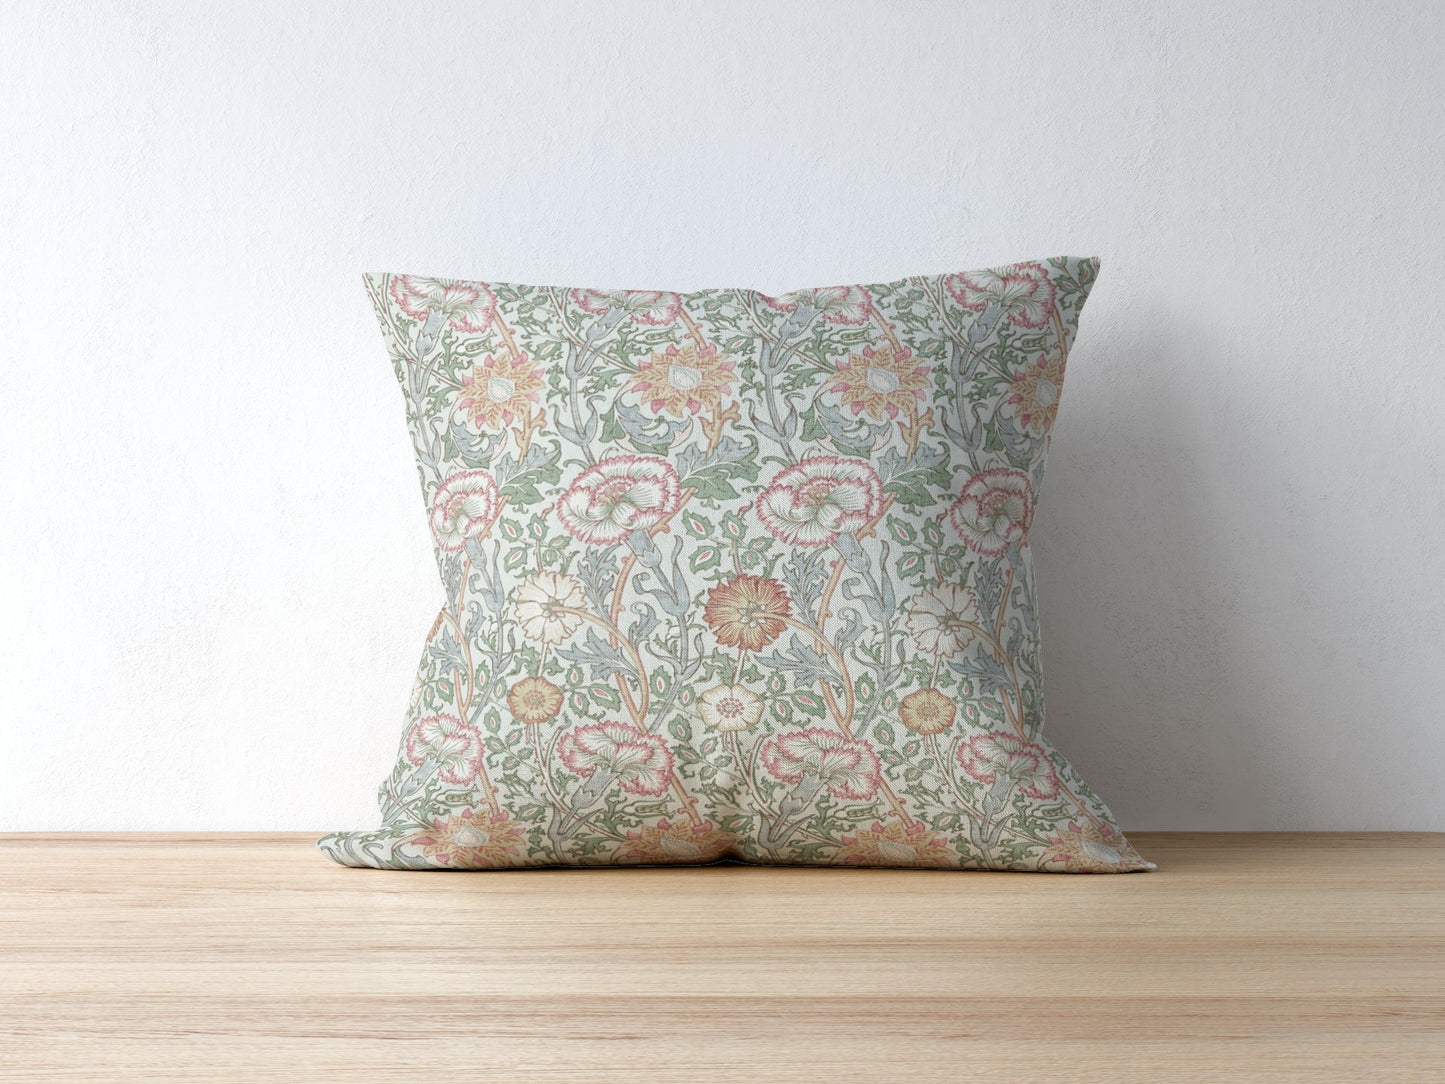 Pink & Rose Outdoor Pillows William Morris Eggshell Rose Pink